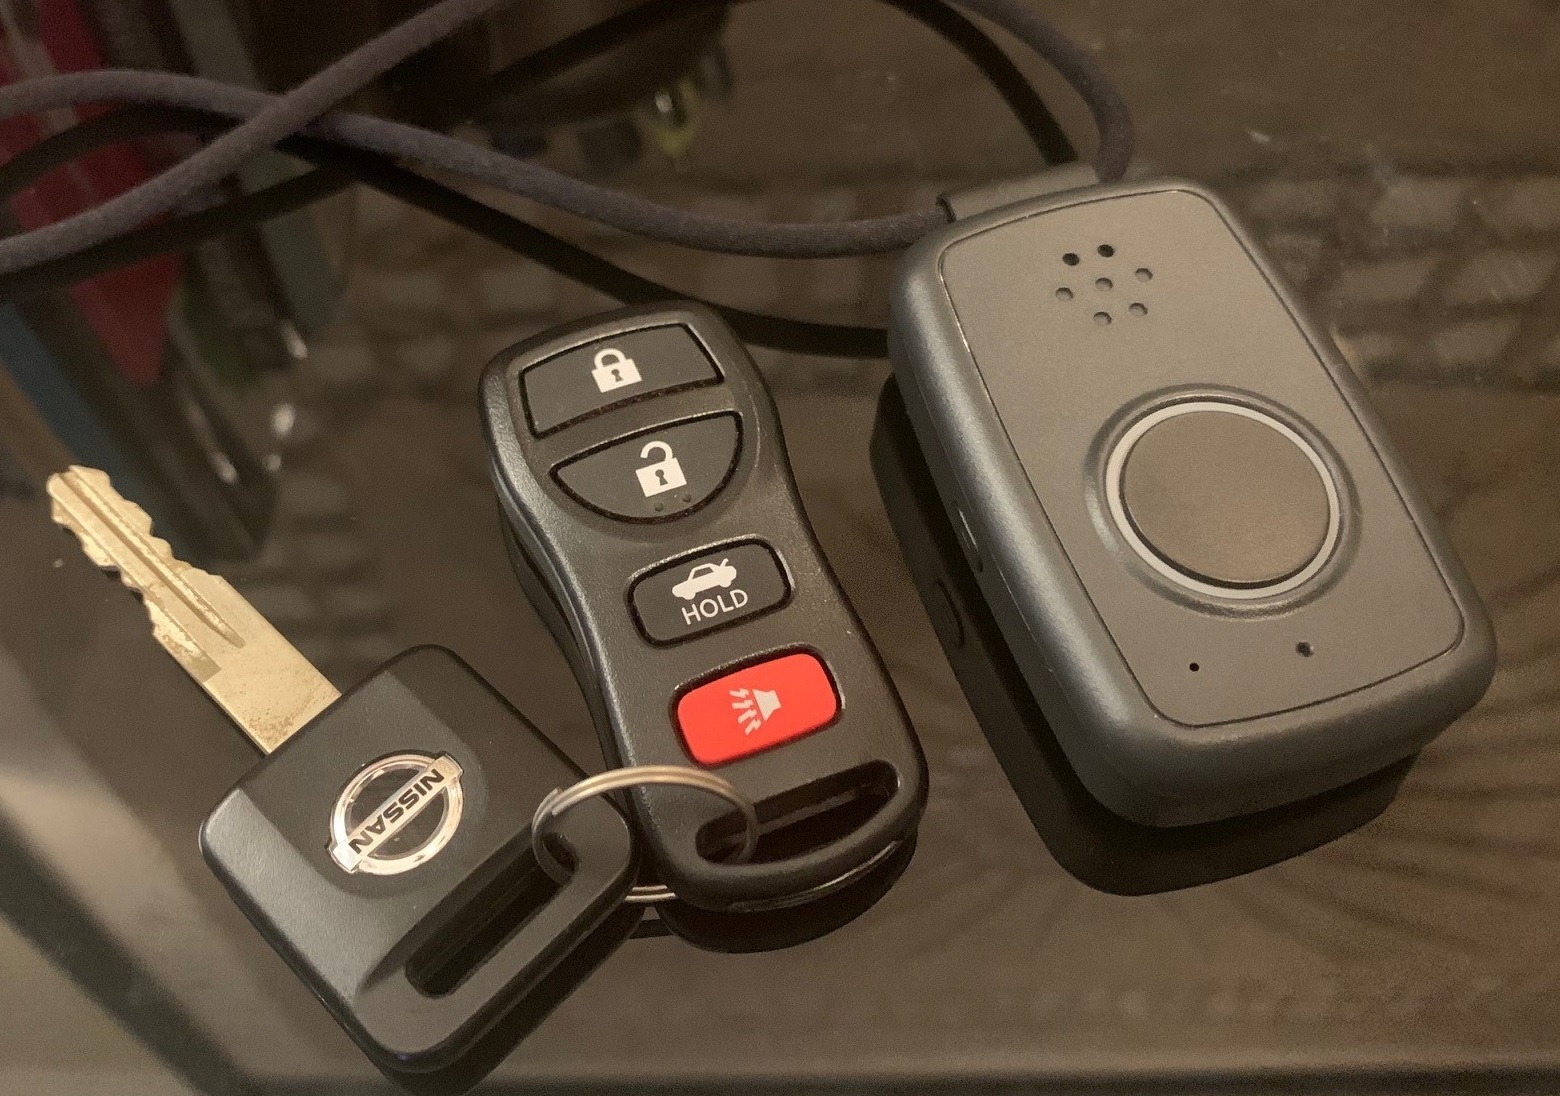 Nissan Key with Micro